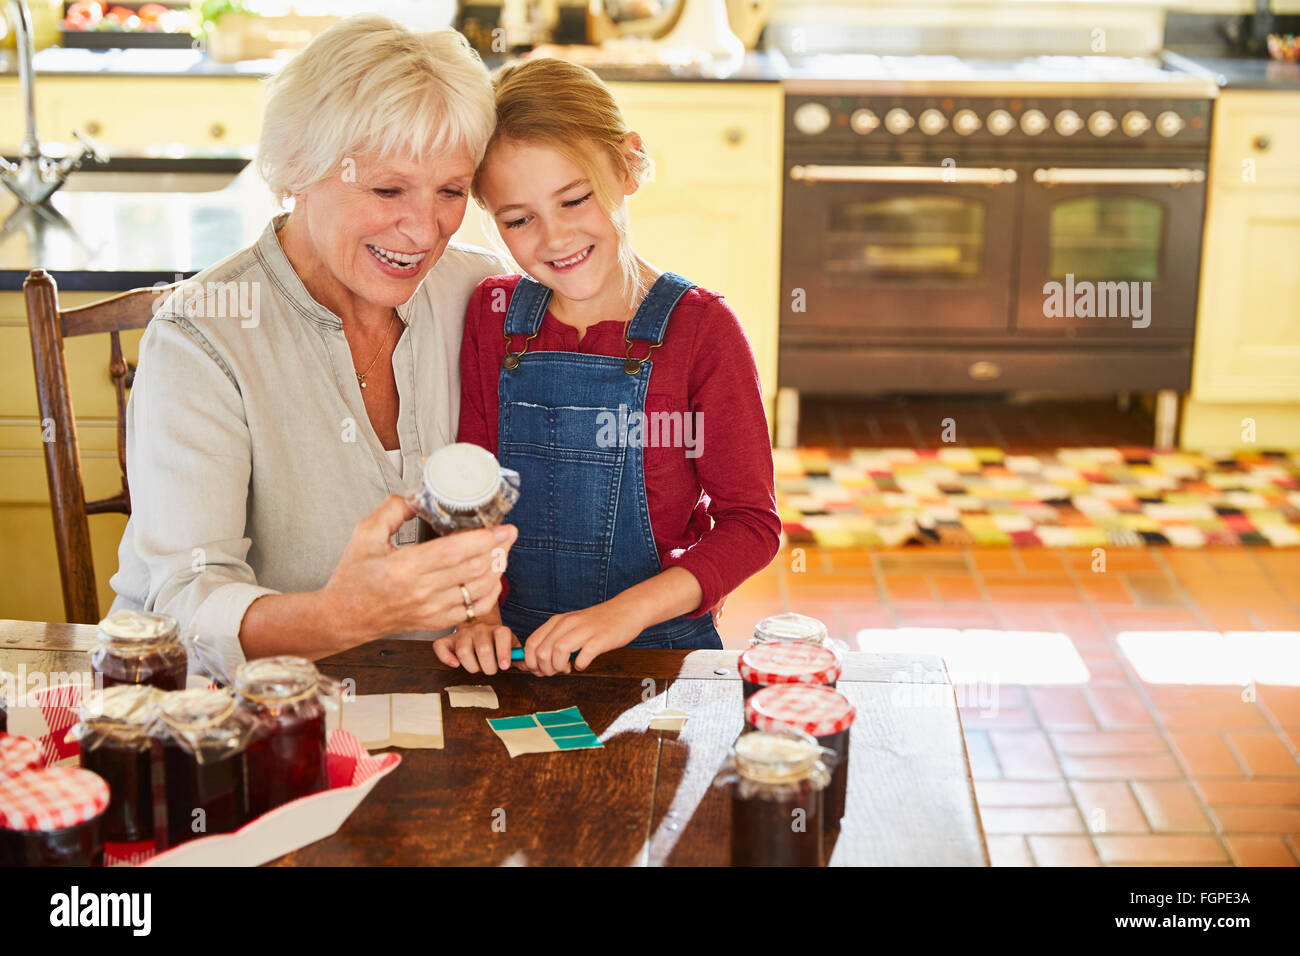 Grandmother and granddaughter canning jam in kitchen Stock Photo